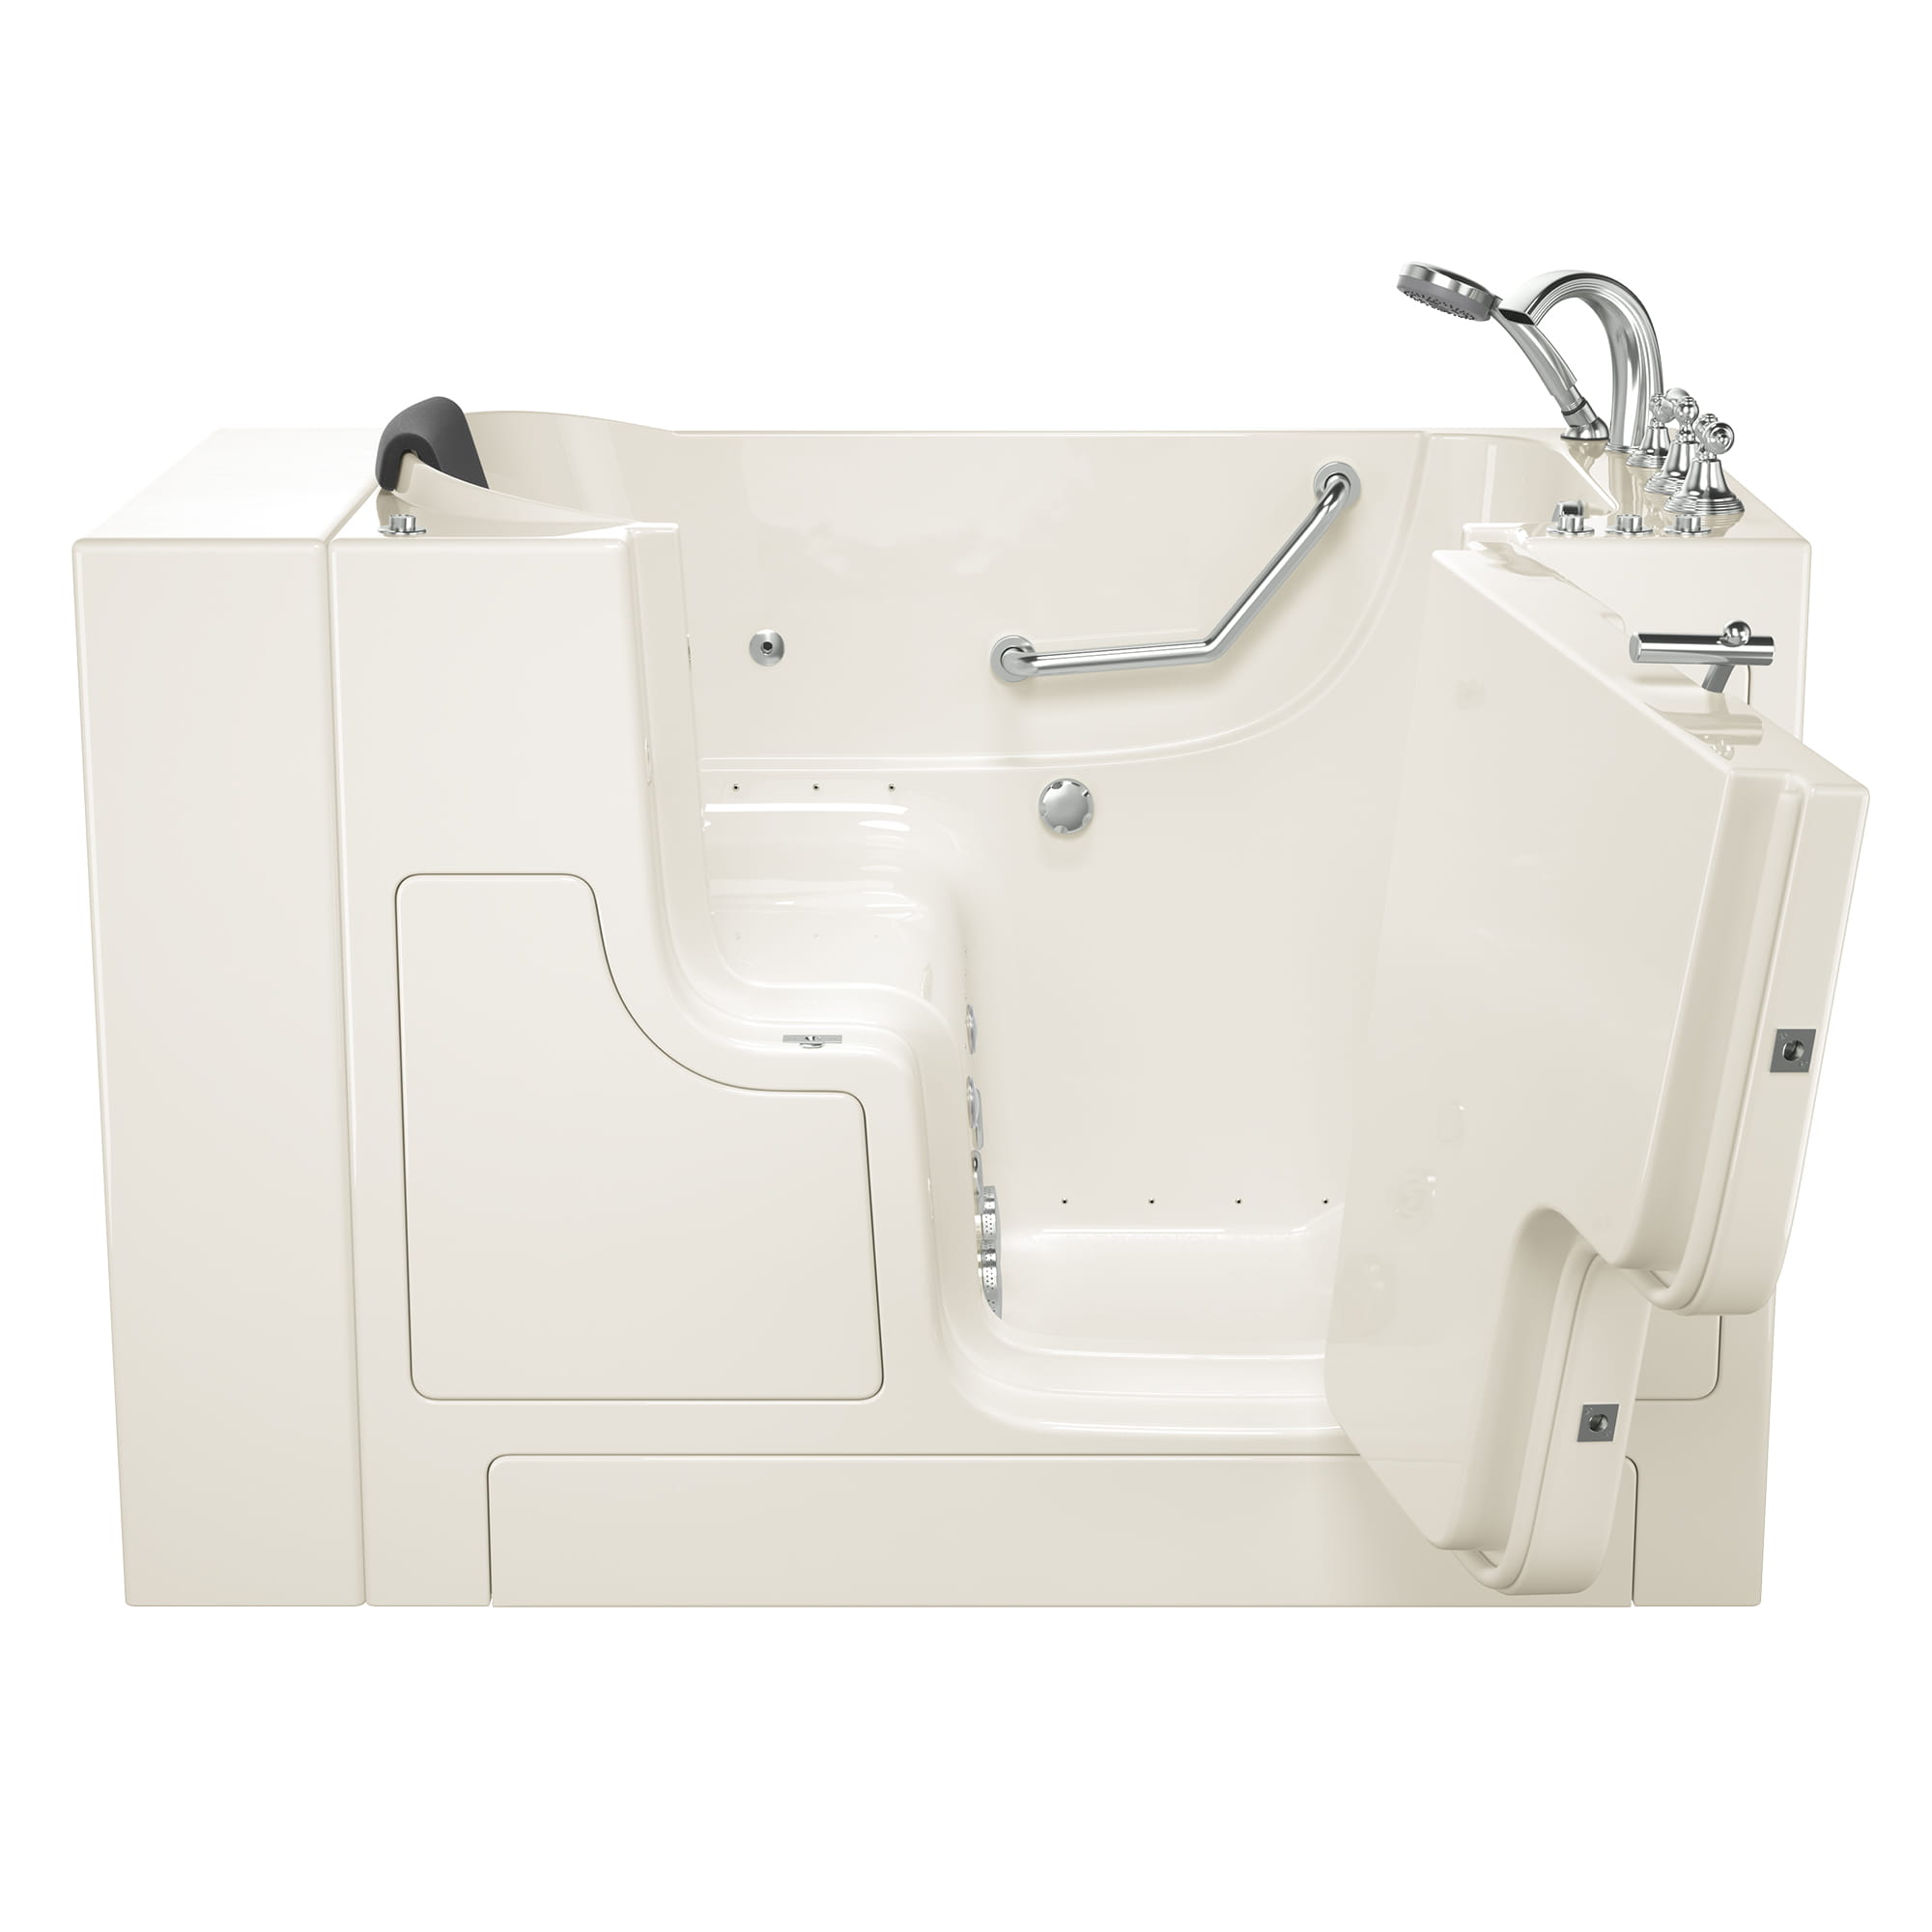 Gelcoat Premium Series 30 x 52 -Inch Walk-in Tub With Combination Air Spa and Whirlpool Systems - Right-Hand Drain With Faucet